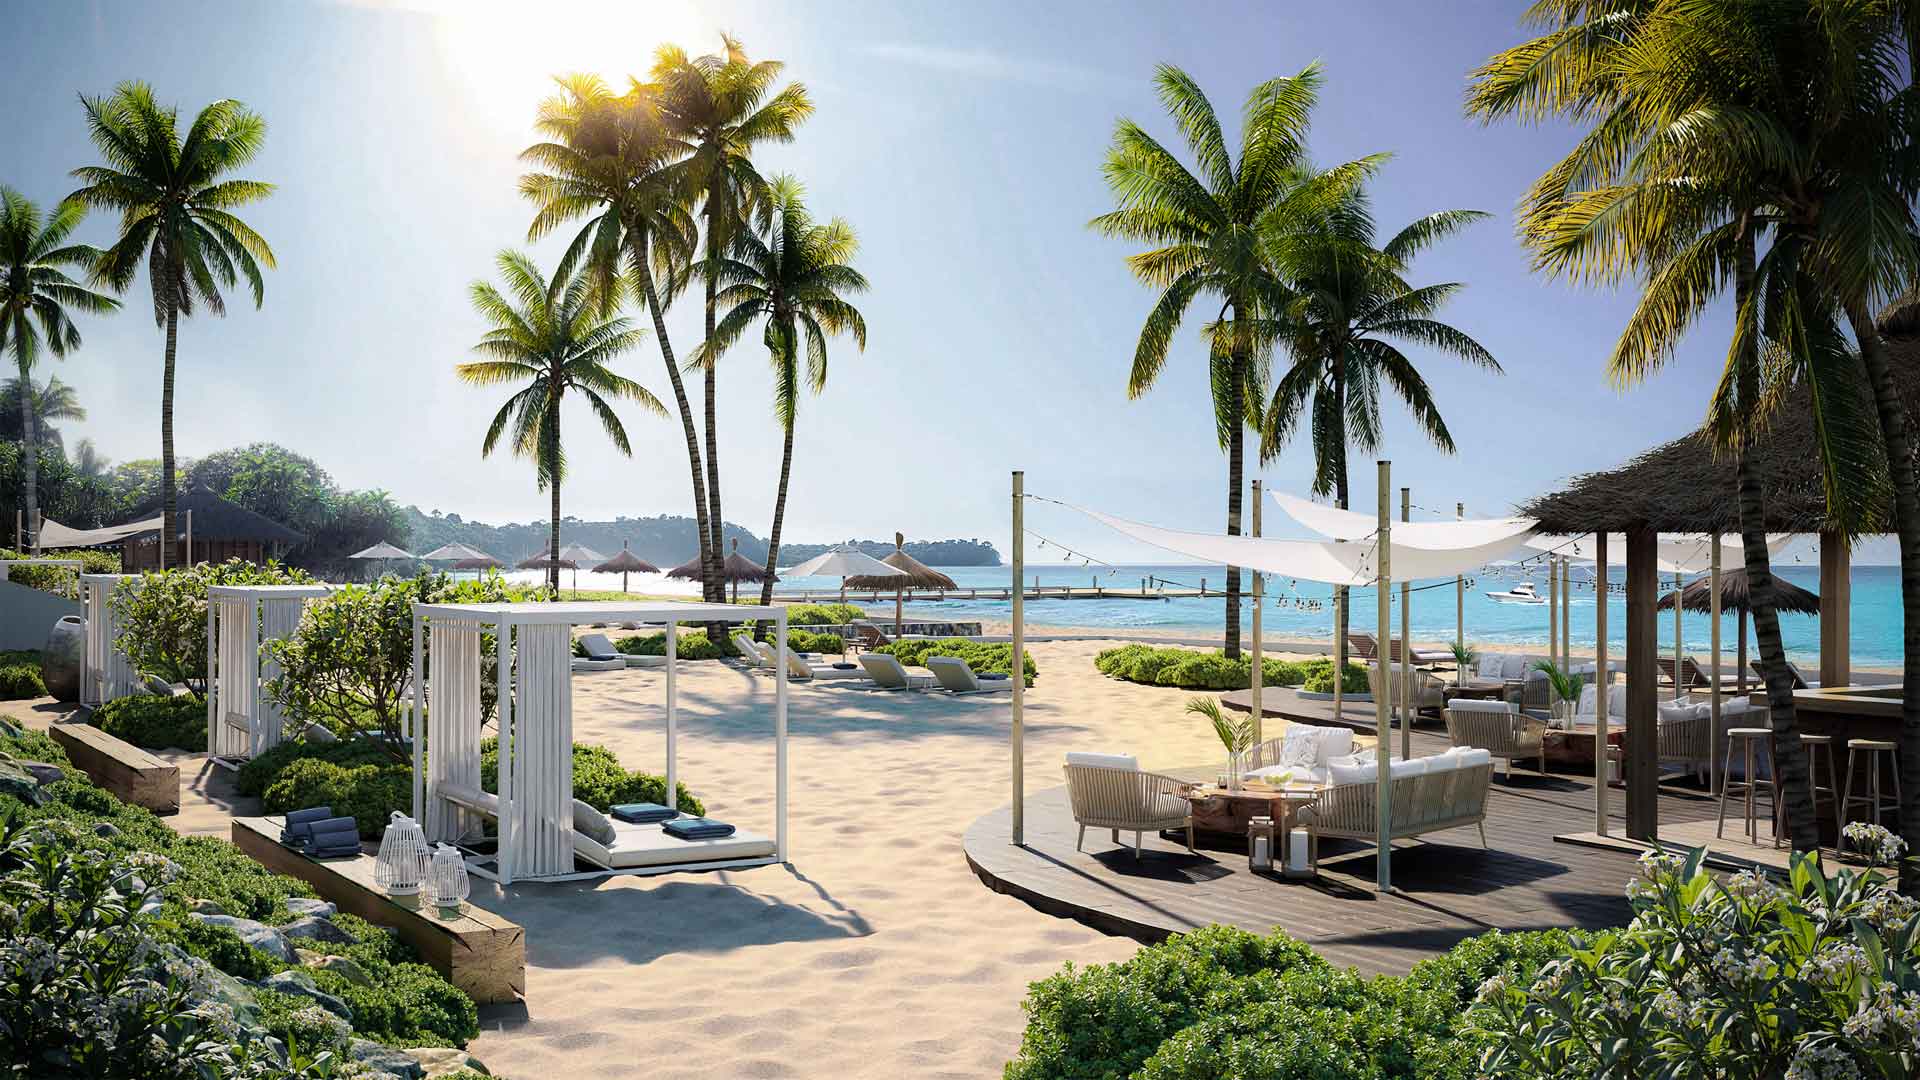 Buy waterfront in Mauritius Invest in Mauritius Buy penthouse in Mauritius westimmo luxury real estate mauritius